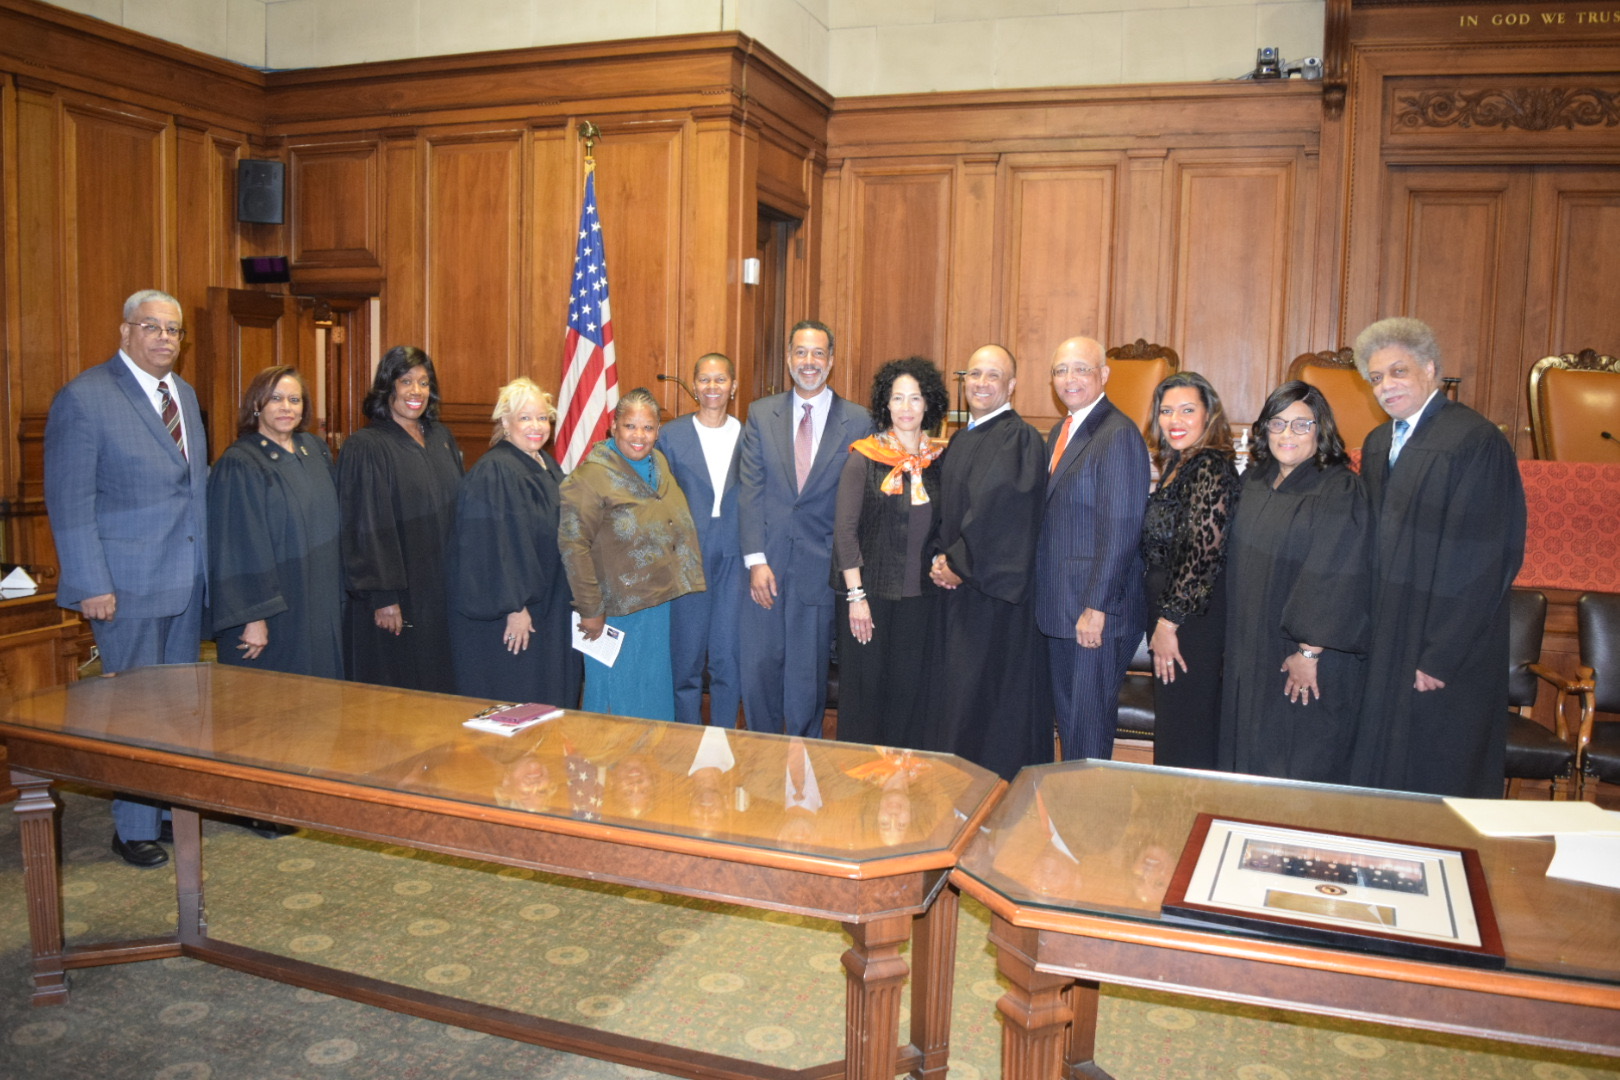 The judges and organizers of the William C. Thompson Awards pose with honorees following the ceremony.